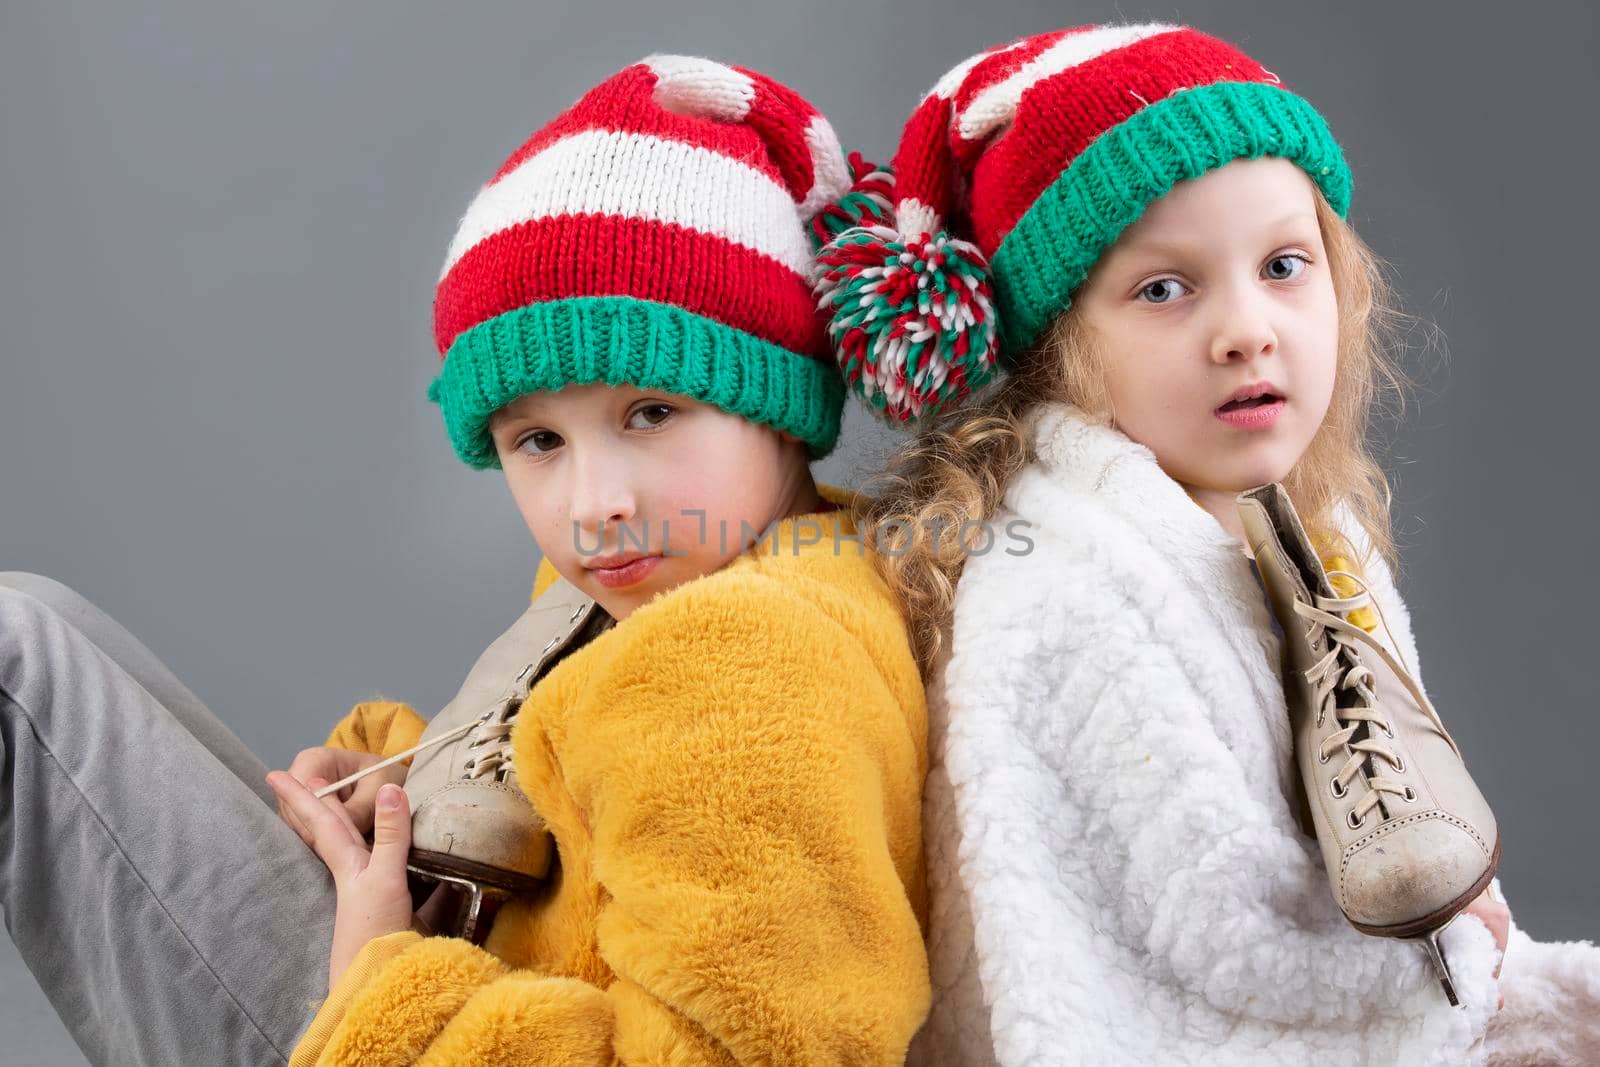 Beautiful little girl and boy in knitted Christmas hats are sitting with their backs to each other and smiling on a gray background. Happy Christmas kids.